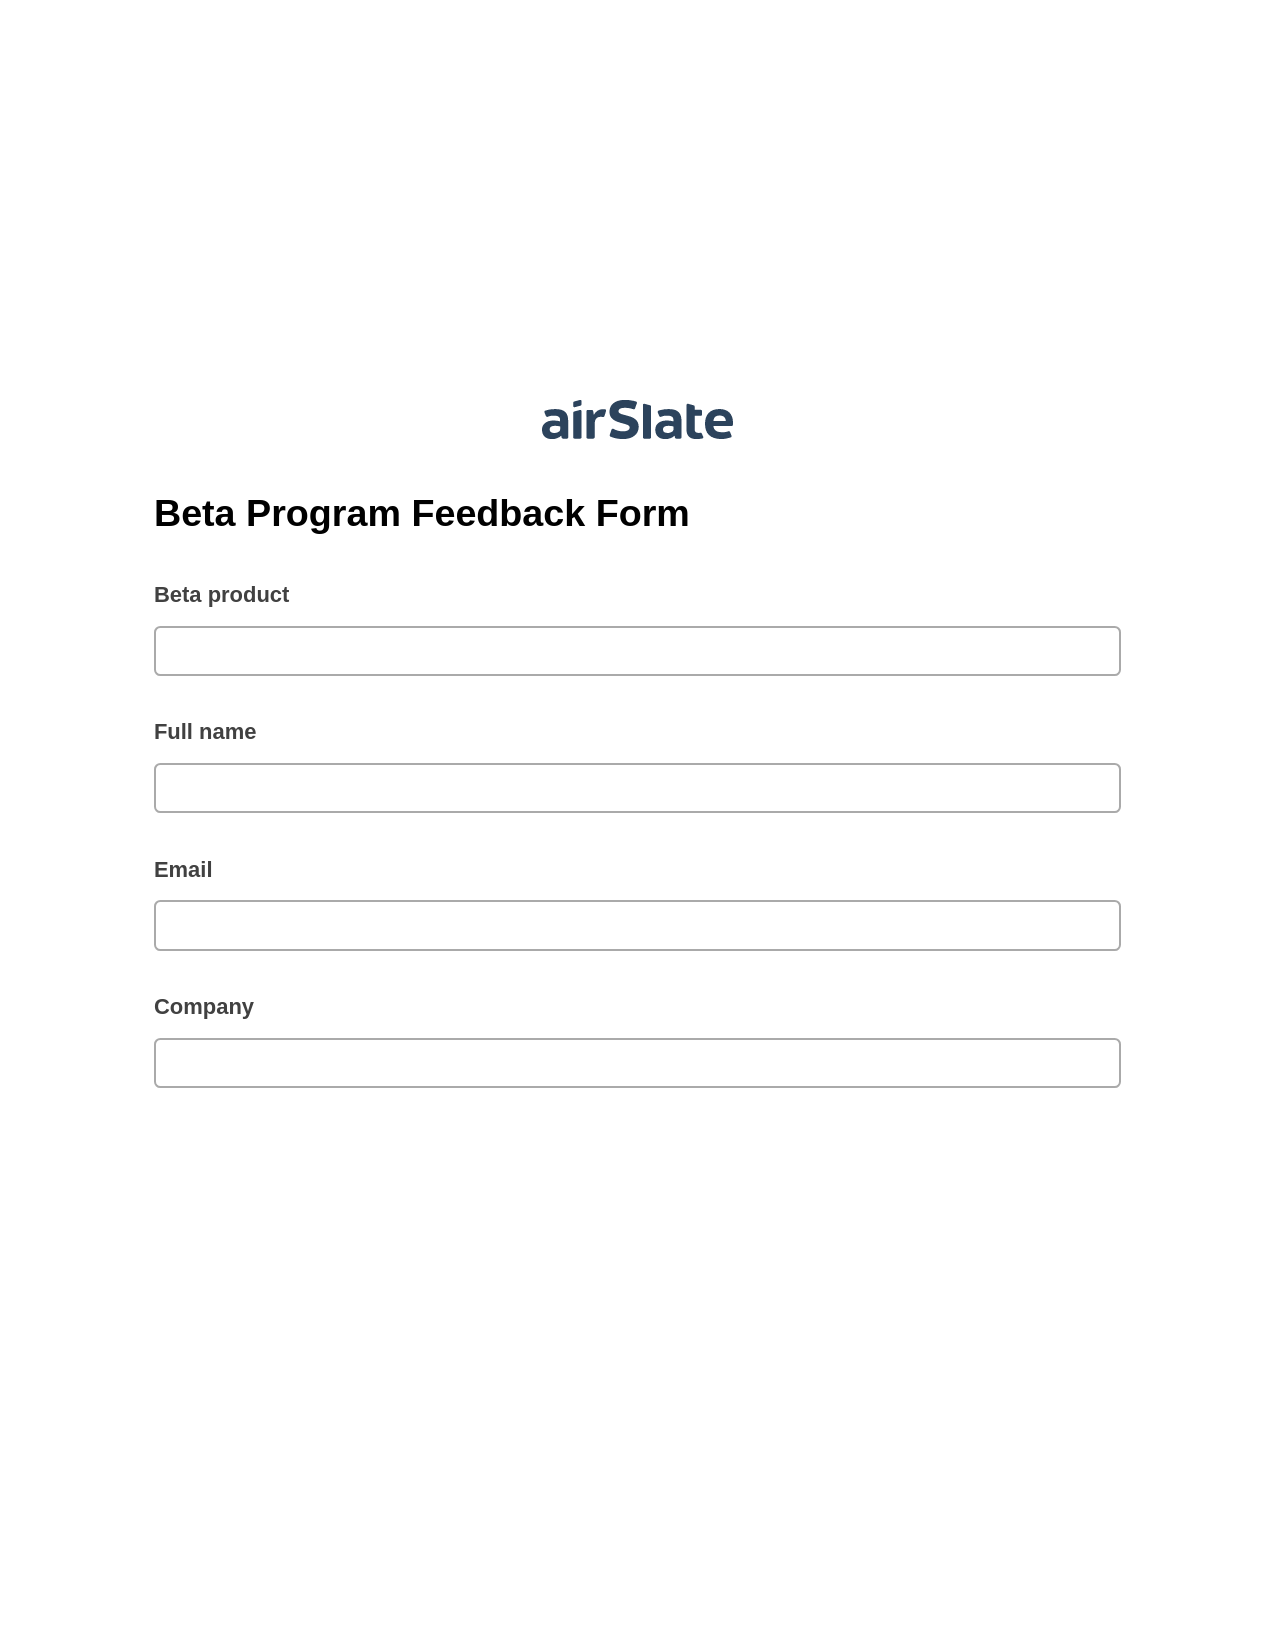 Multirole Beta Program Feedback Form Pre-fill from another Slate Bot, Export to MS Dynamics 365 Bot, Export to Salesforce Bot